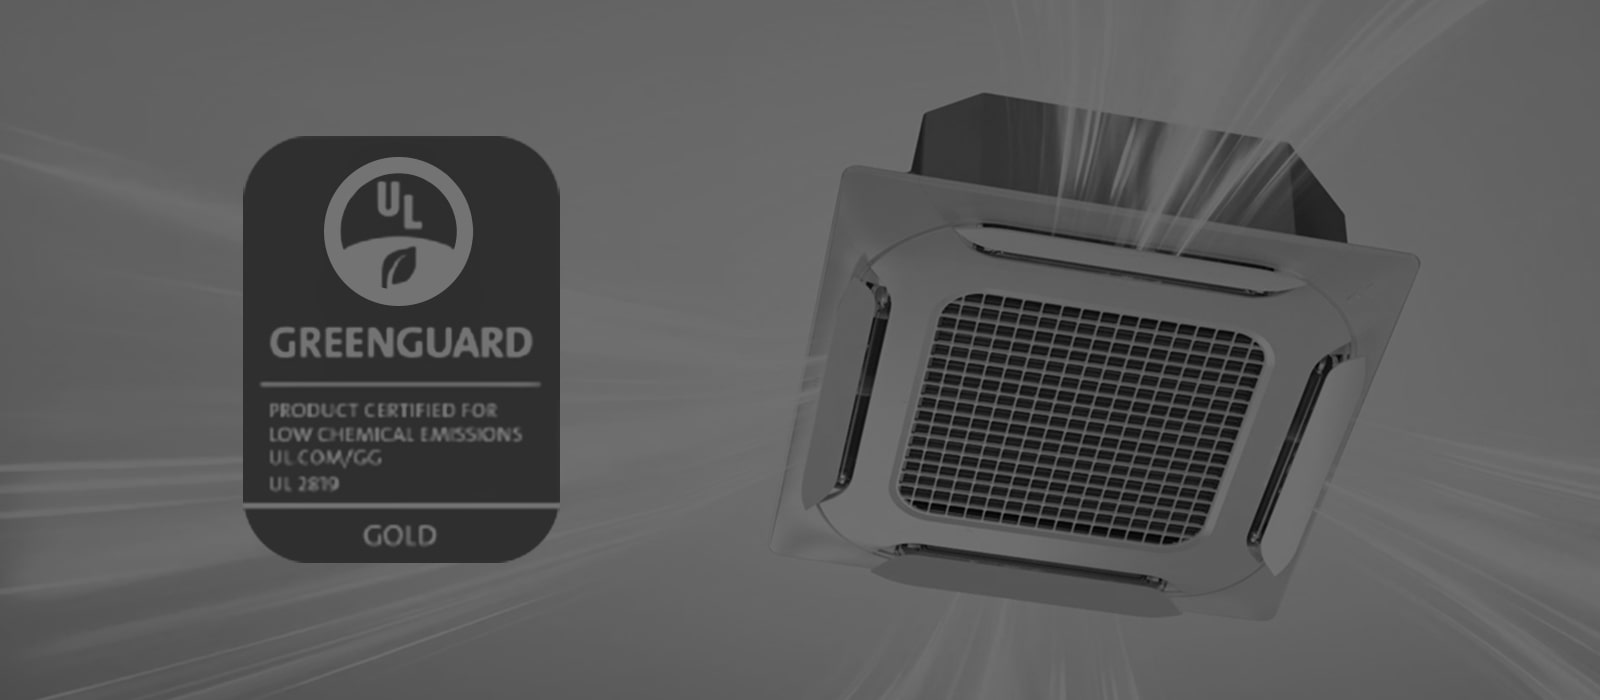 Image of a DUAL Vane Cassette and the certification logo of GREENGUARD Gold.